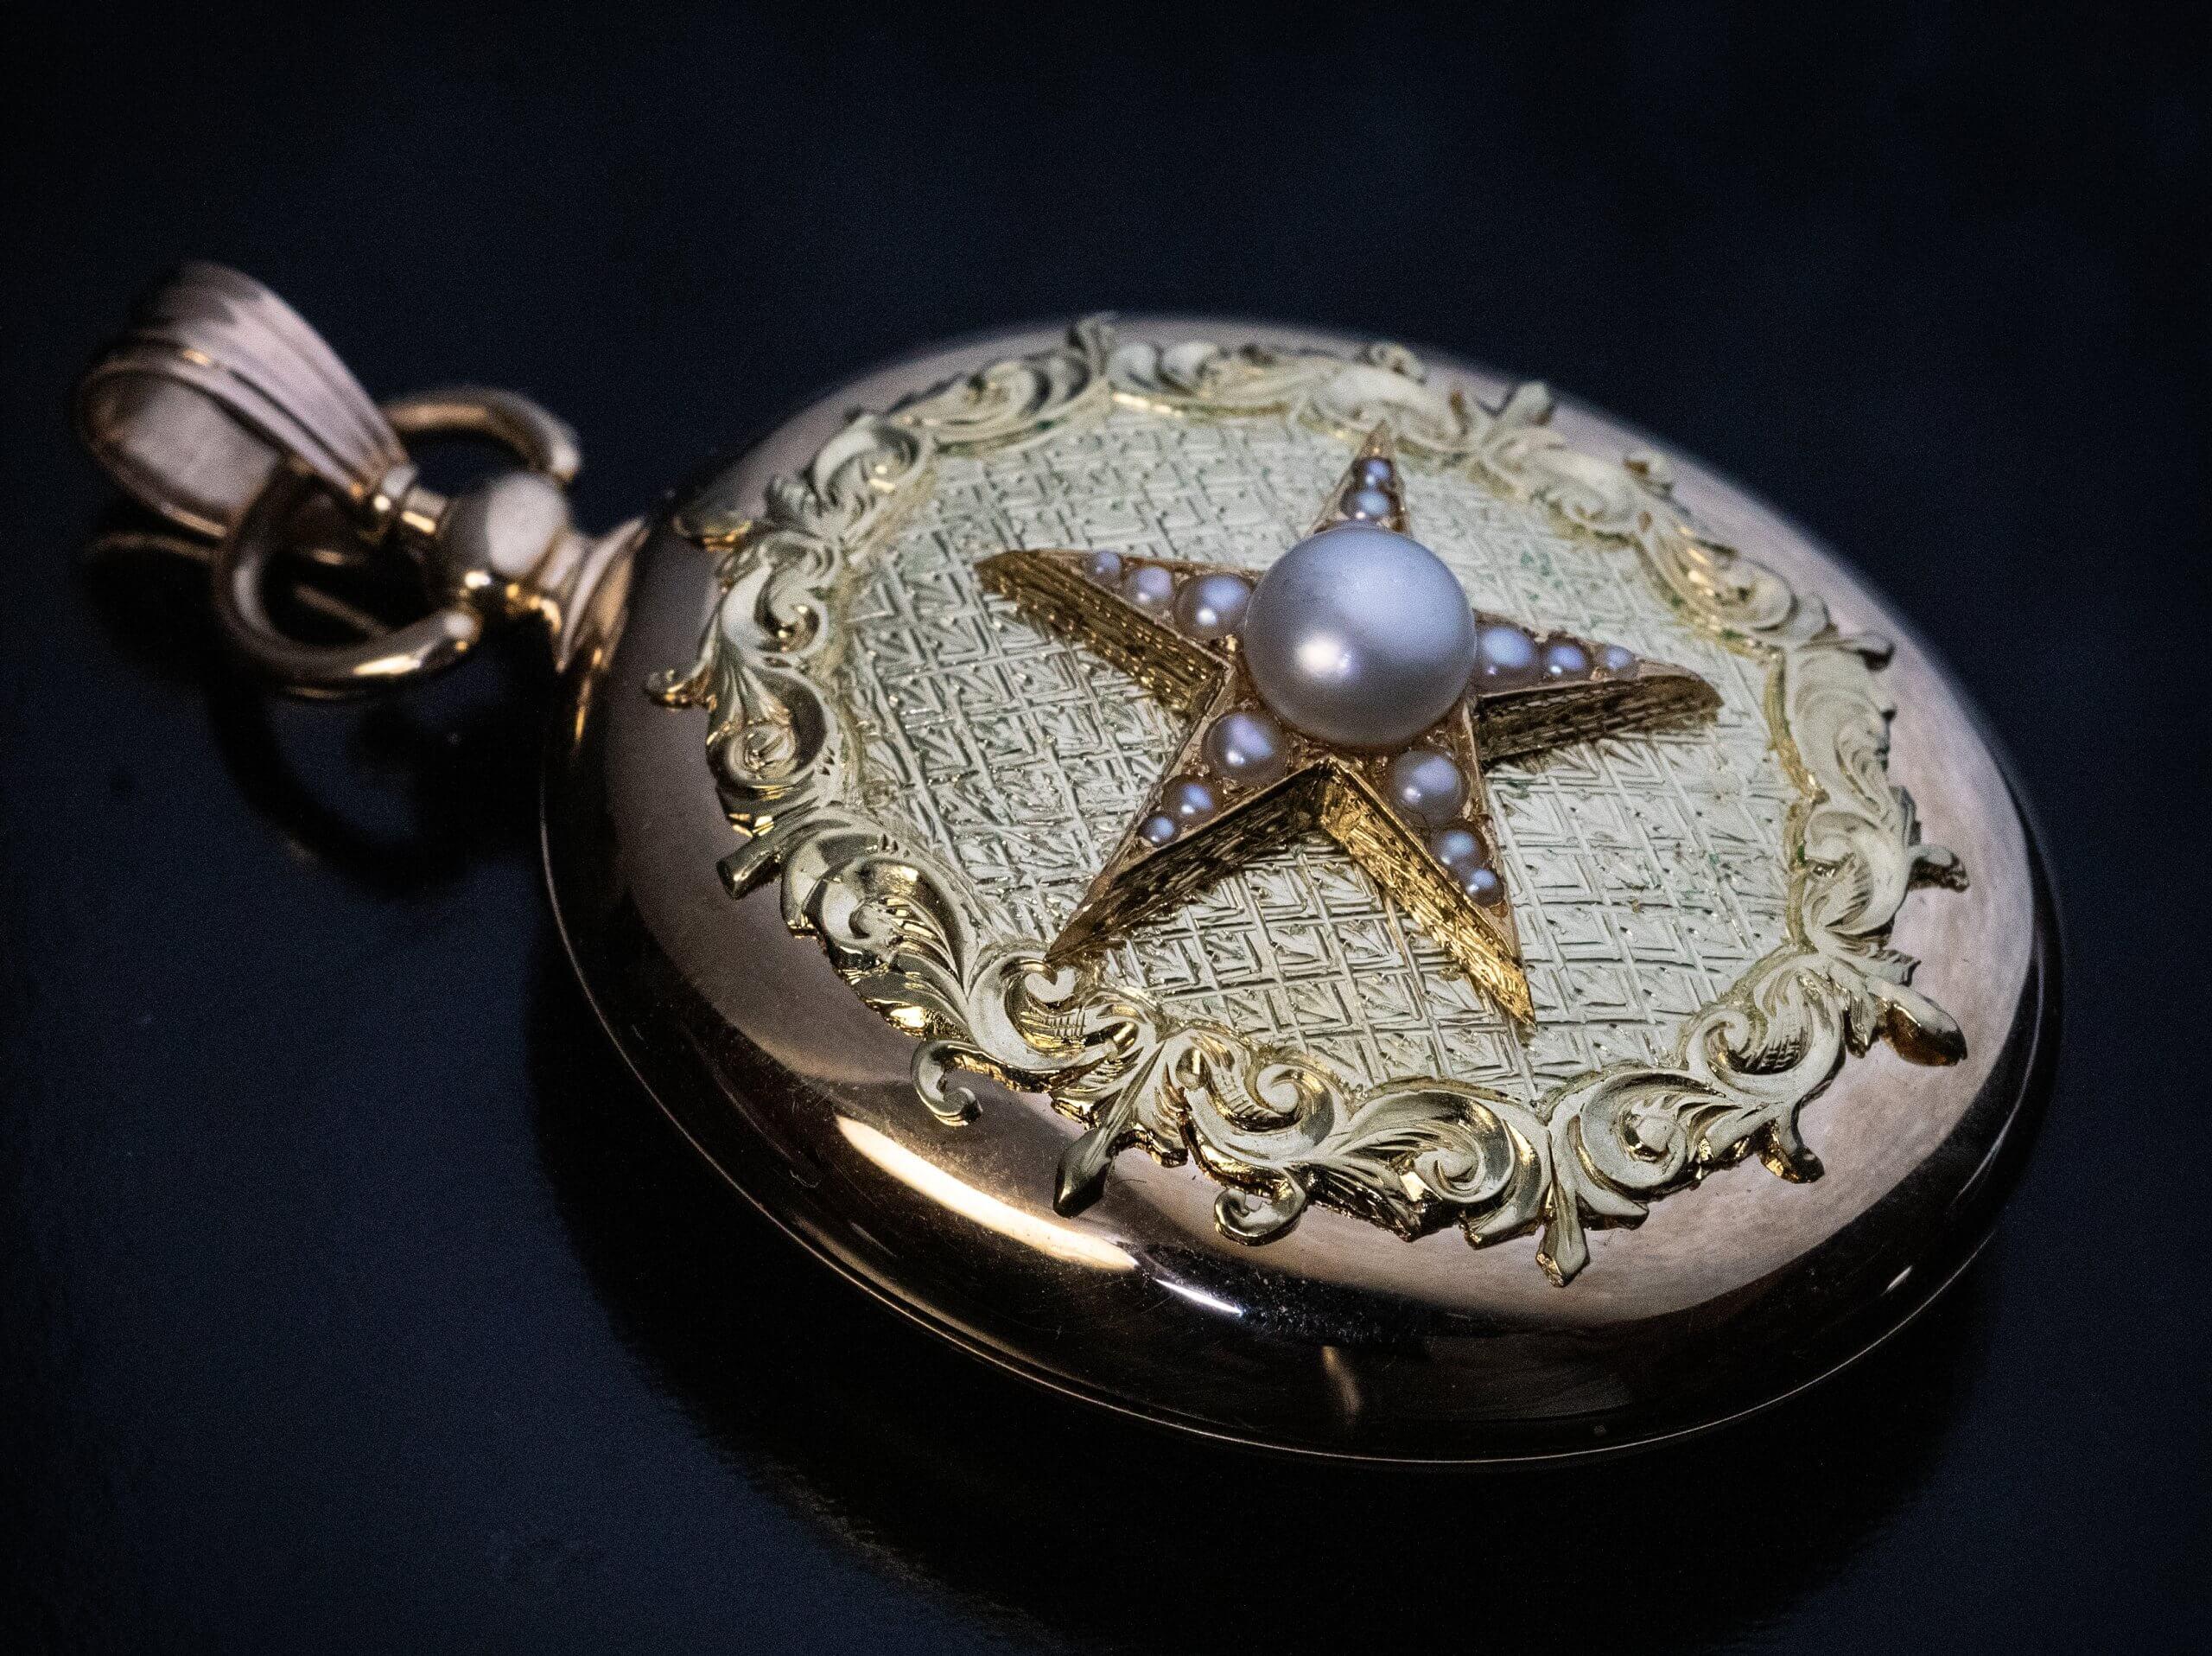 Austrian, circa 1870.  This large antique locket pendant is superbly crafted in two tone 14K gold. The front cover of the locket is centered with a pearl star mounted on an engraved background and framed by a hand-carved gold scrolling foliage. The